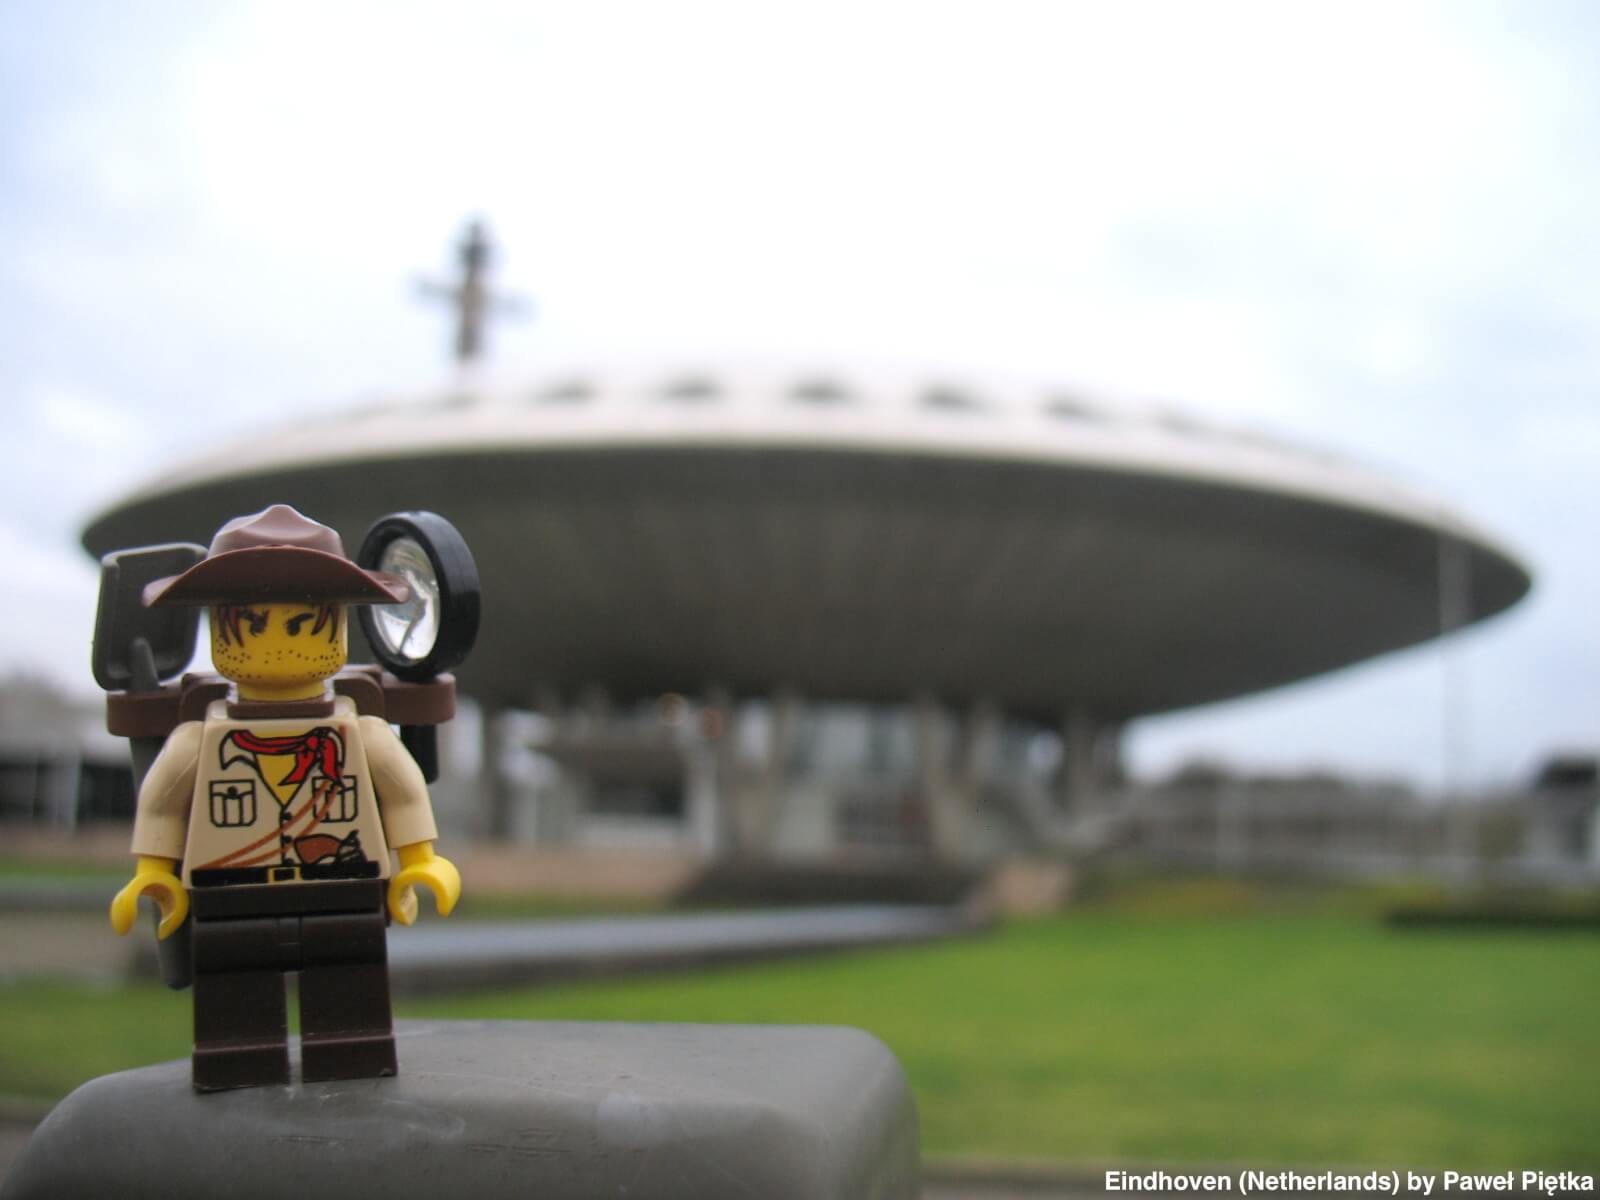 Eindhoven (Netherlands) - The Evoluon conference center